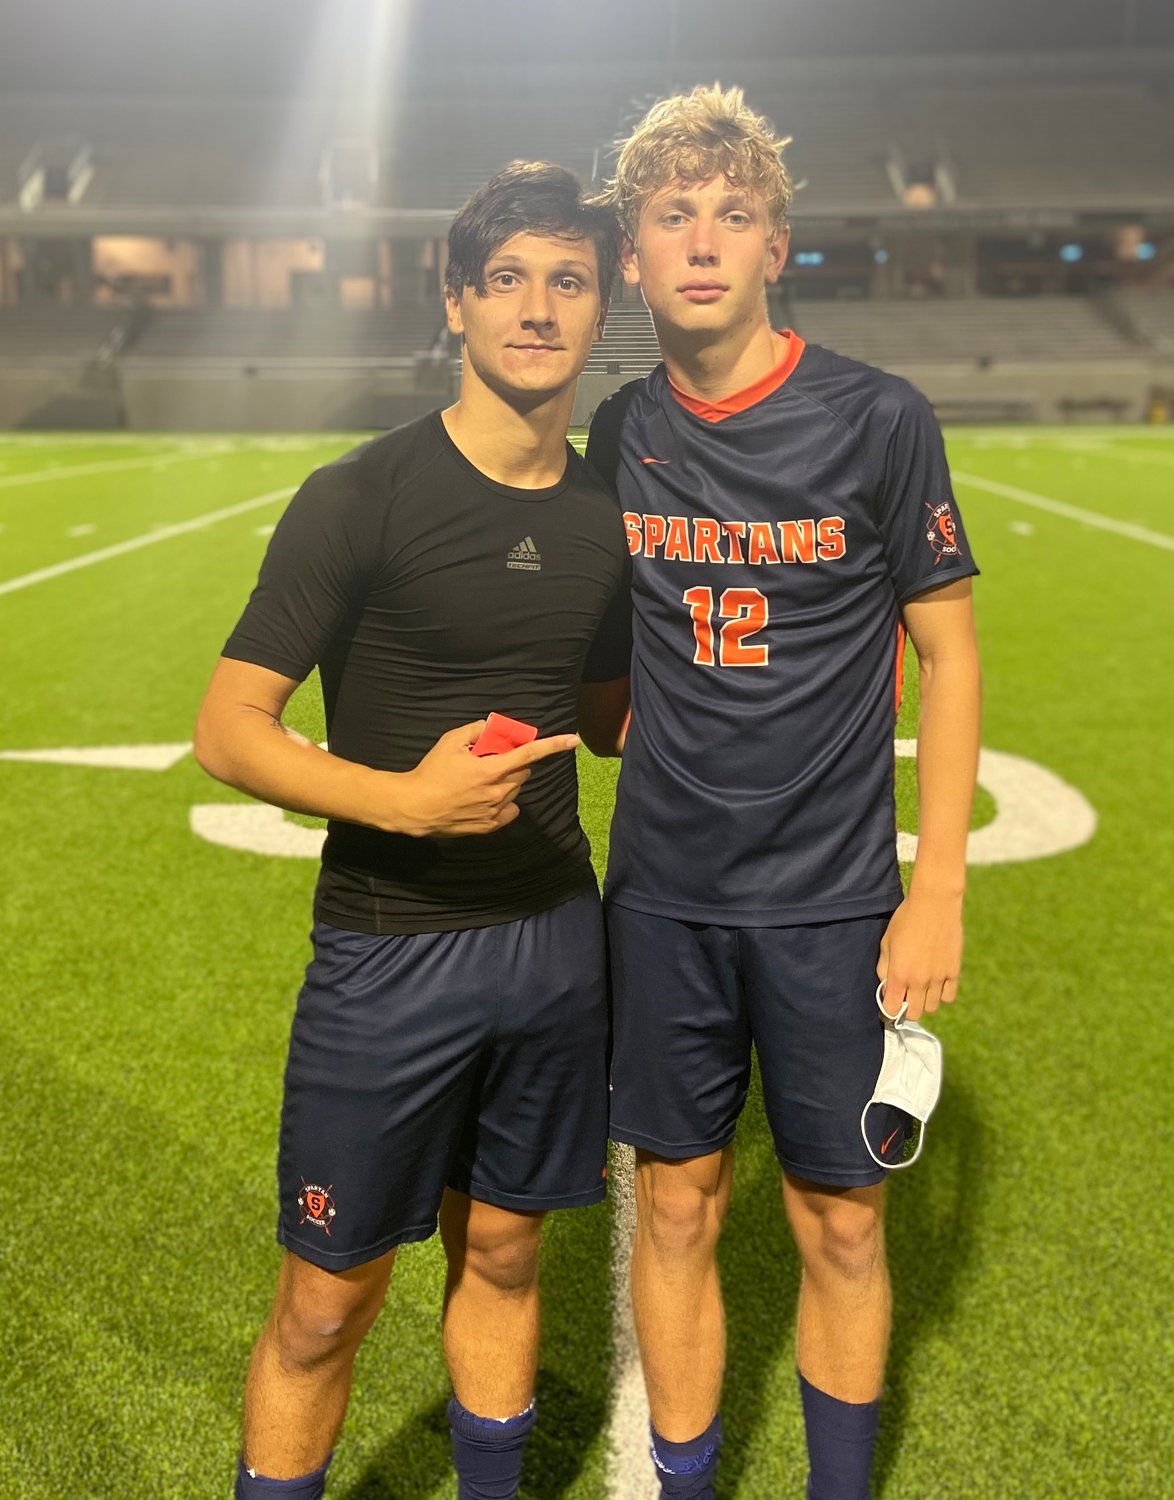 Seven Lakes senior Vicente Garcia, left, and sophomore Hunter Merritt, right, each scored two goals in the Spartans’ 5-2 Class 6A bi-district playoff win over George Ranch on Friday, March 25, at Legacy Stadium.